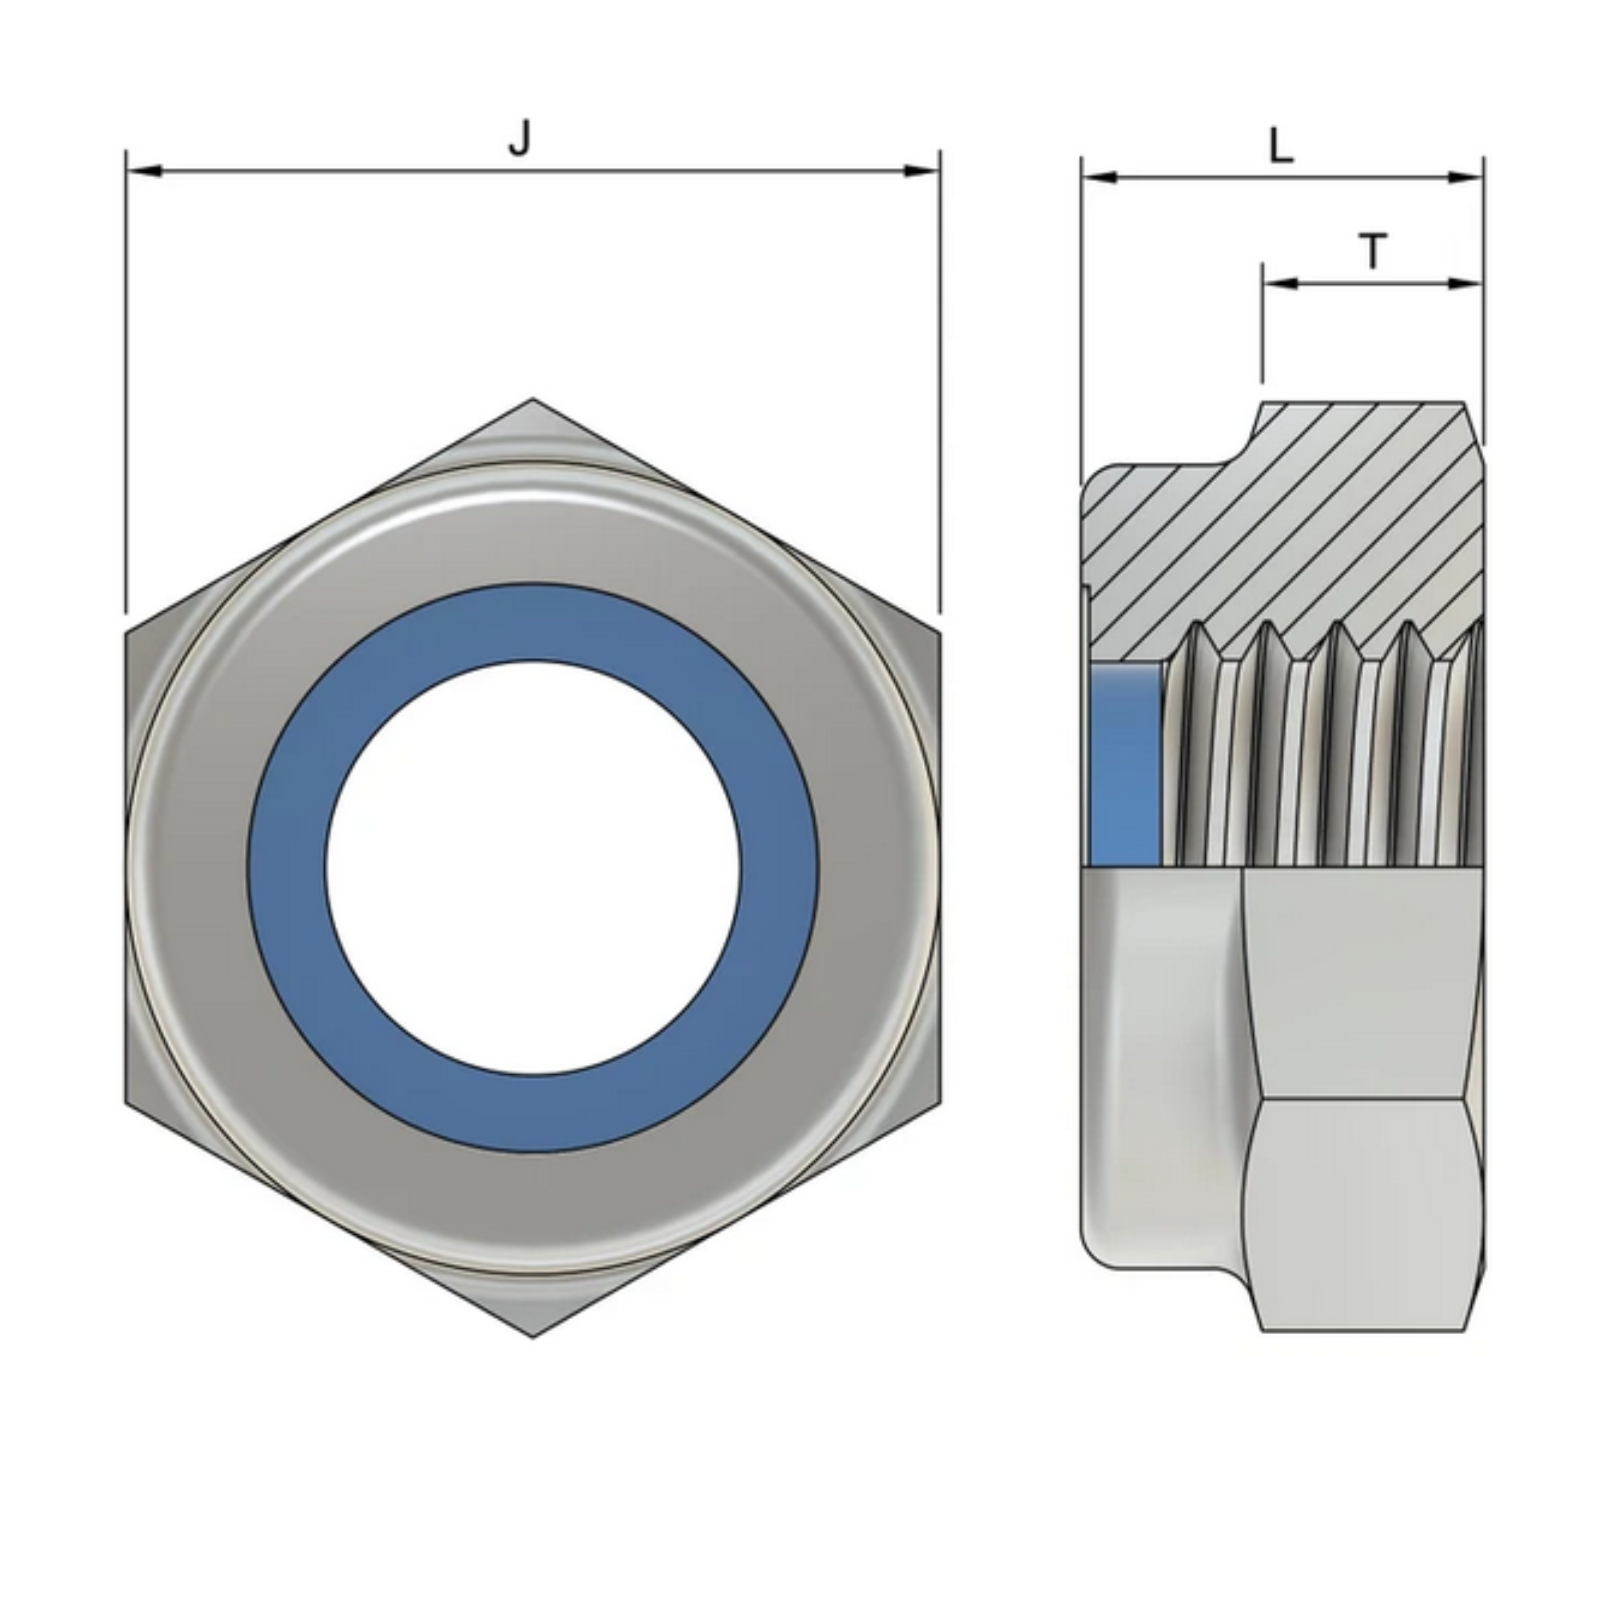 M2 Hexagon Nylon Locking Nuts (DIN 985) - Stainless Steel (A2)